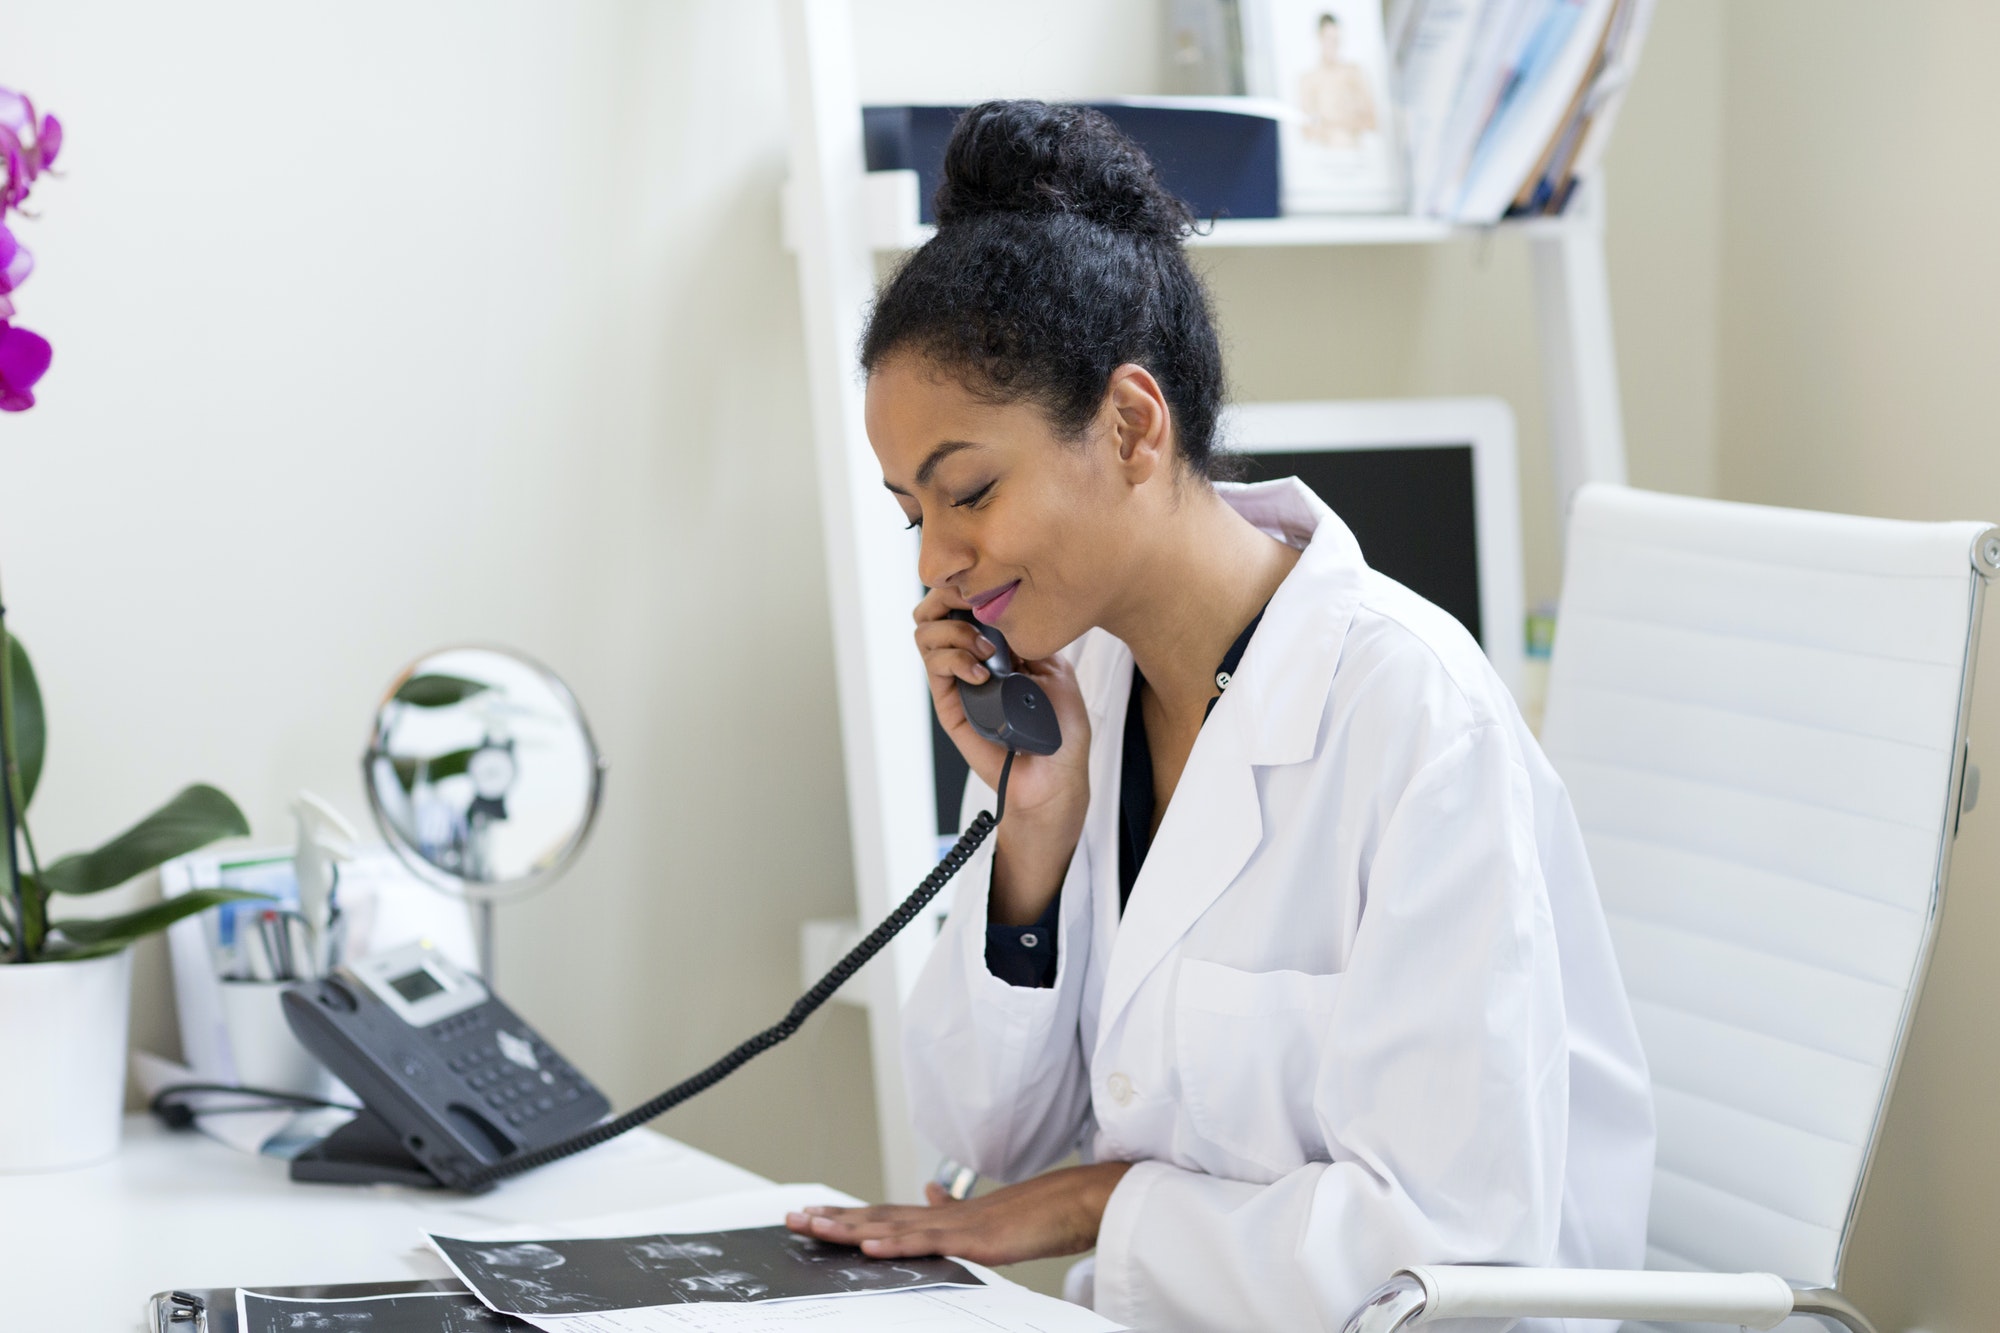 Doctor at desk making telephone call